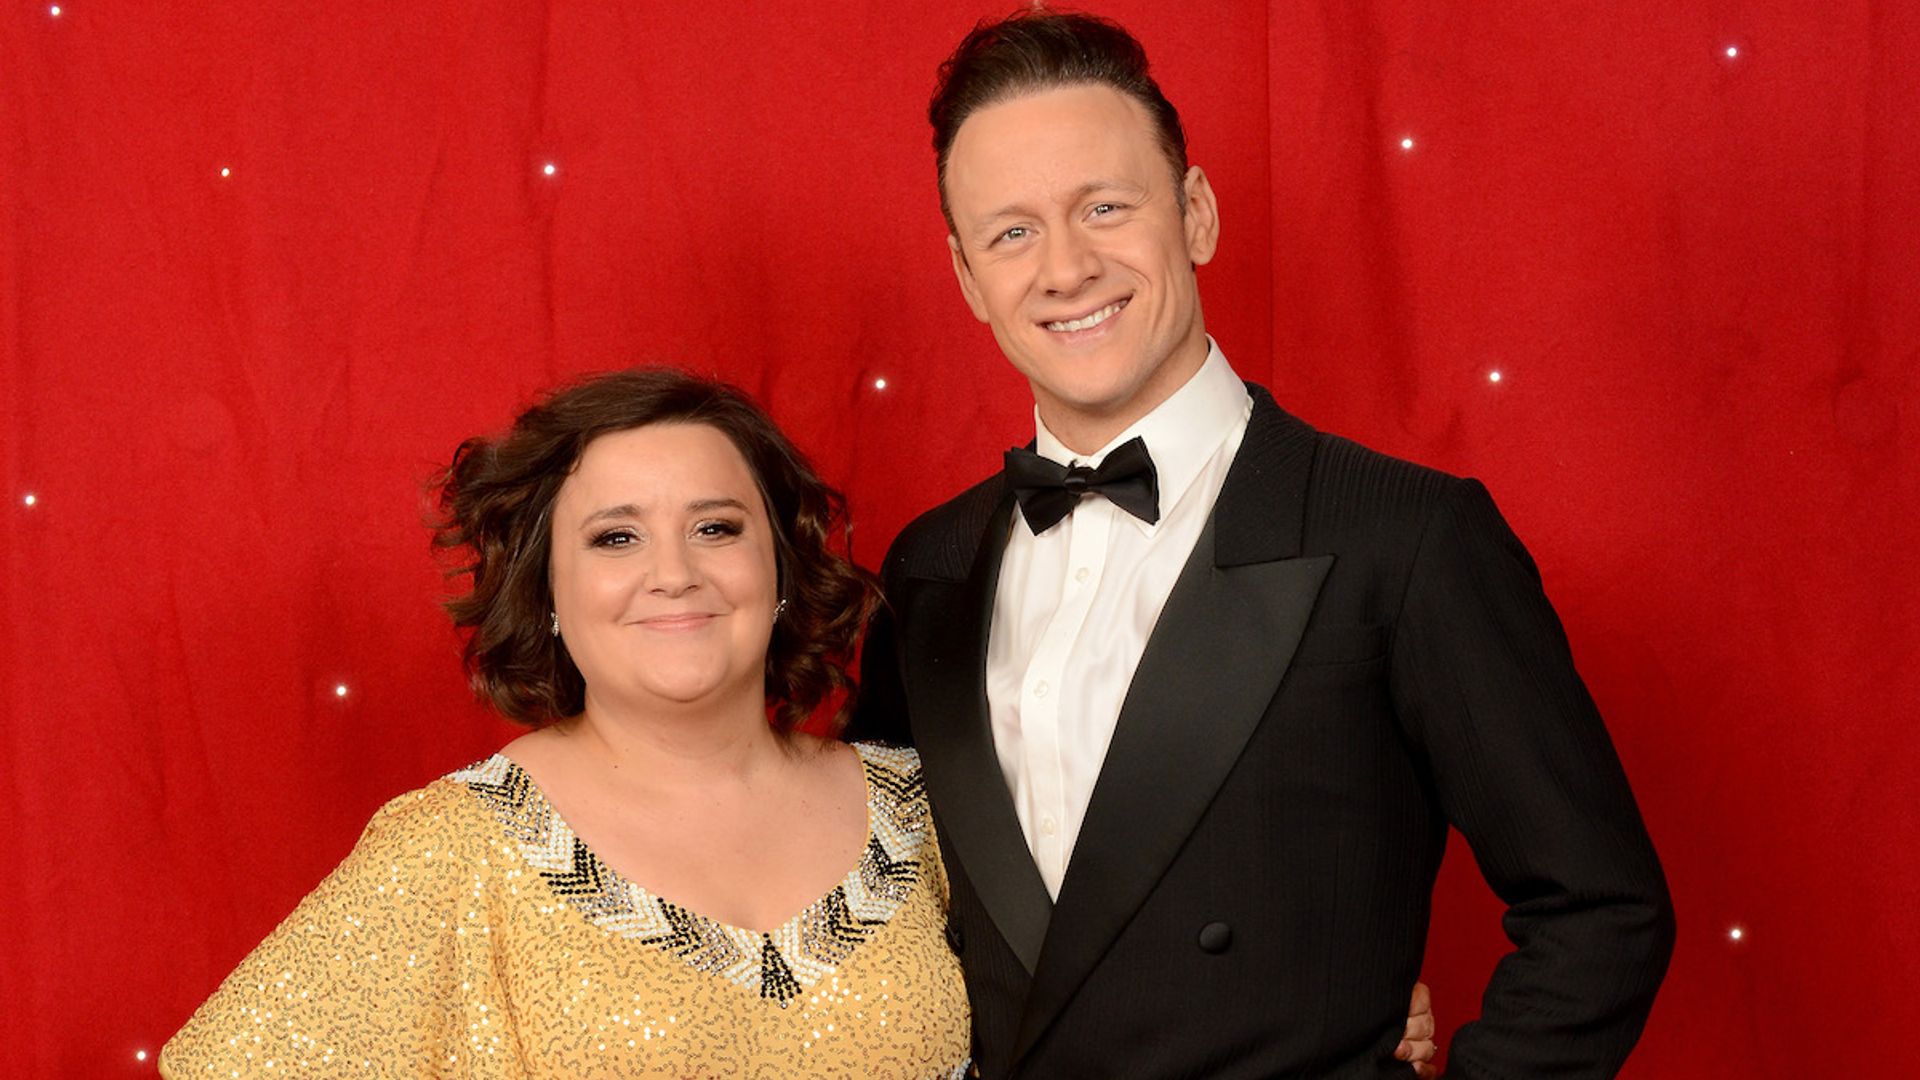 Susan Calman felt 'uncomfortable' watching Strictly partner Kevin Clifton on stage in new musical – find out why